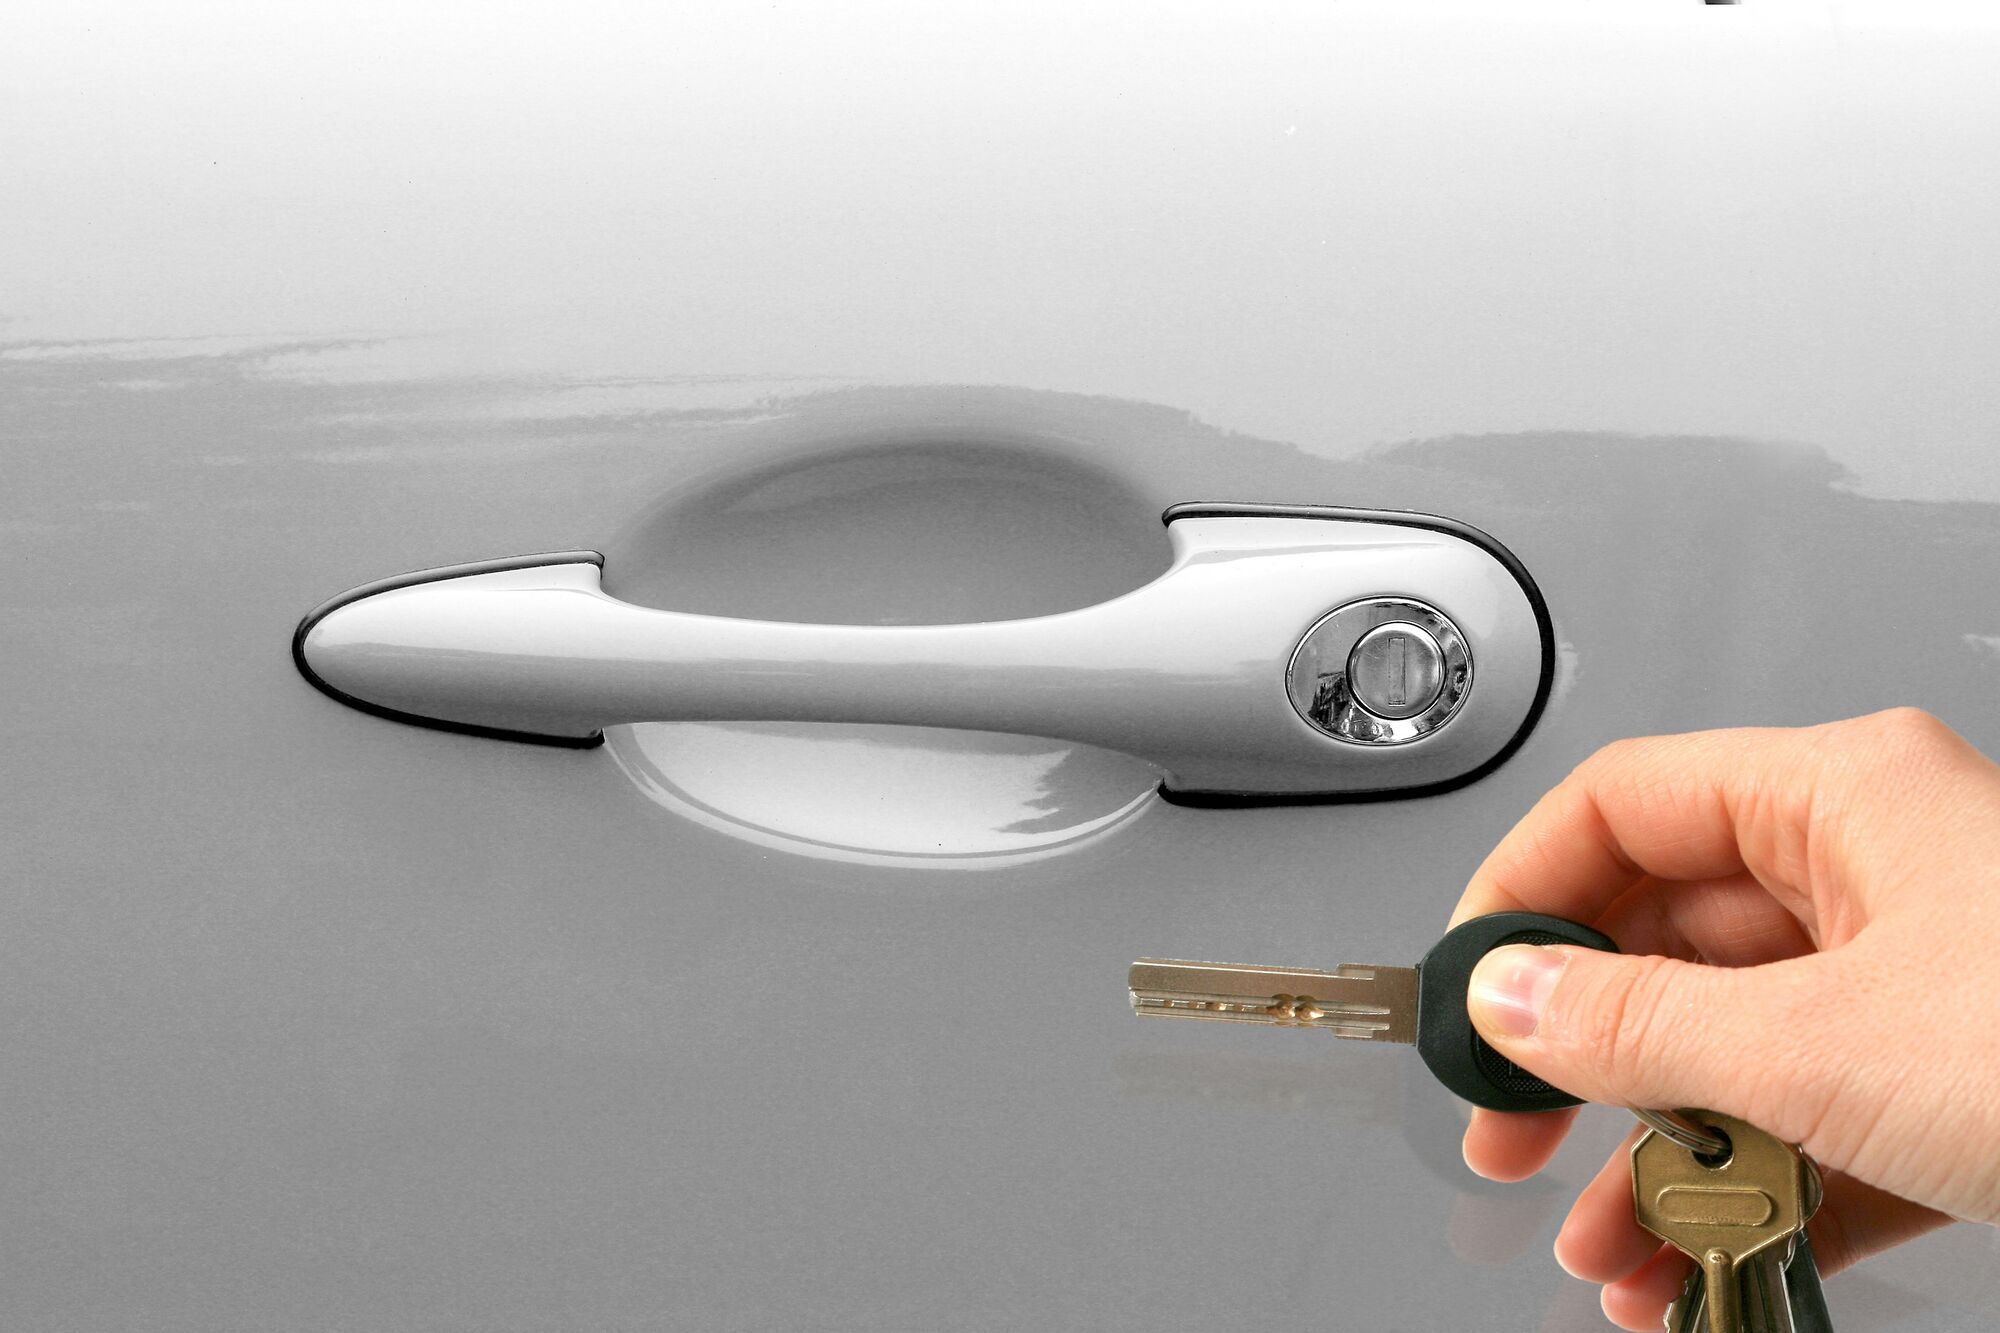 <span style="font-weight: 400;">Close-up of a hand holding a car key near the door handle of a silver vehicle, preparing to unlock it</span>